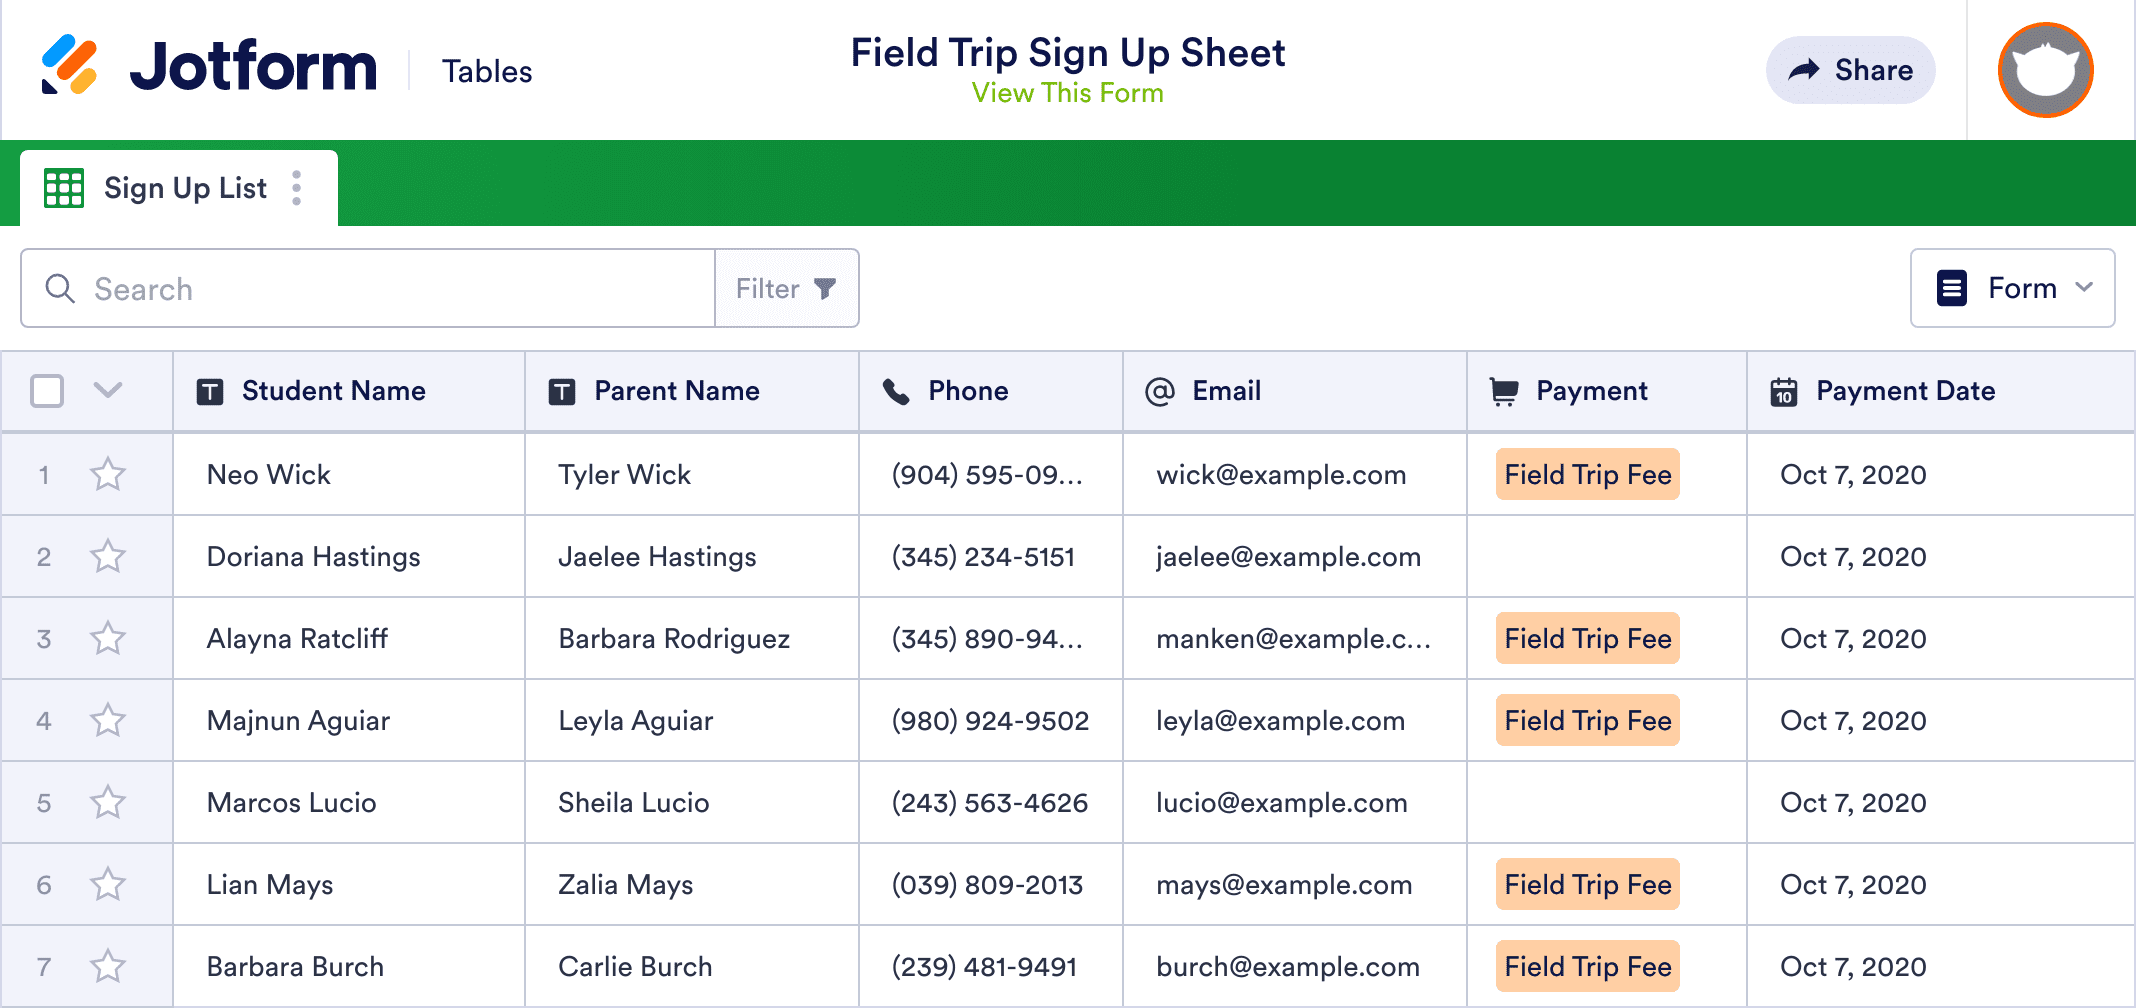 Field Trip Form - Fill Online, Printable, Fillable, Blank